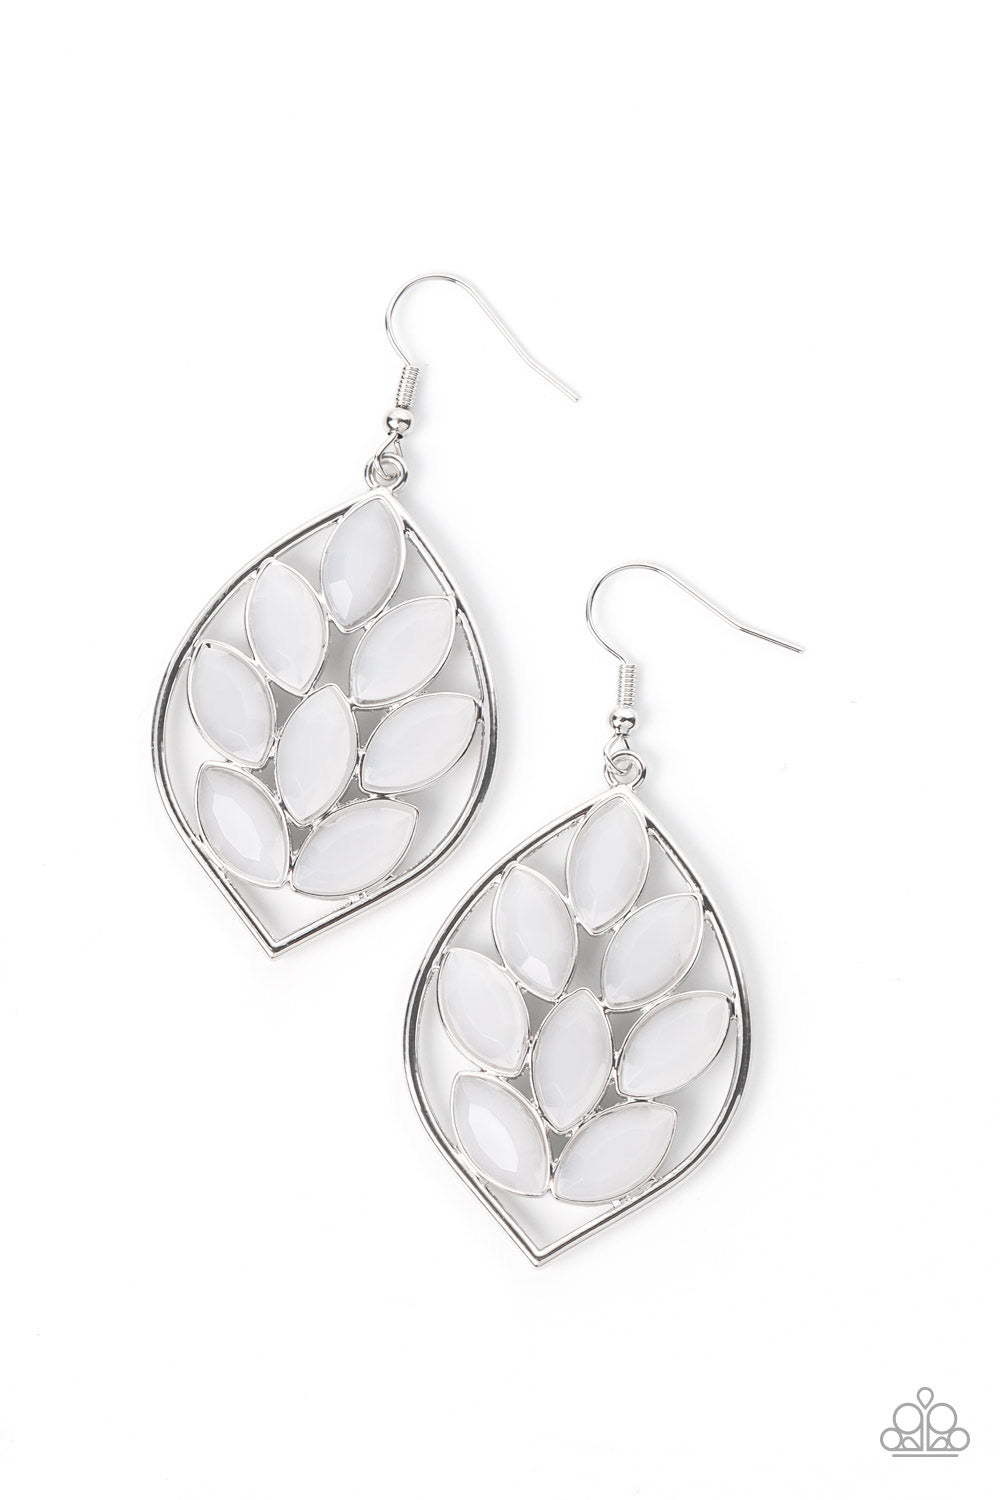 Paparazzi Glacial Glades - White Earrings -Paparazzi Jewelry Images 